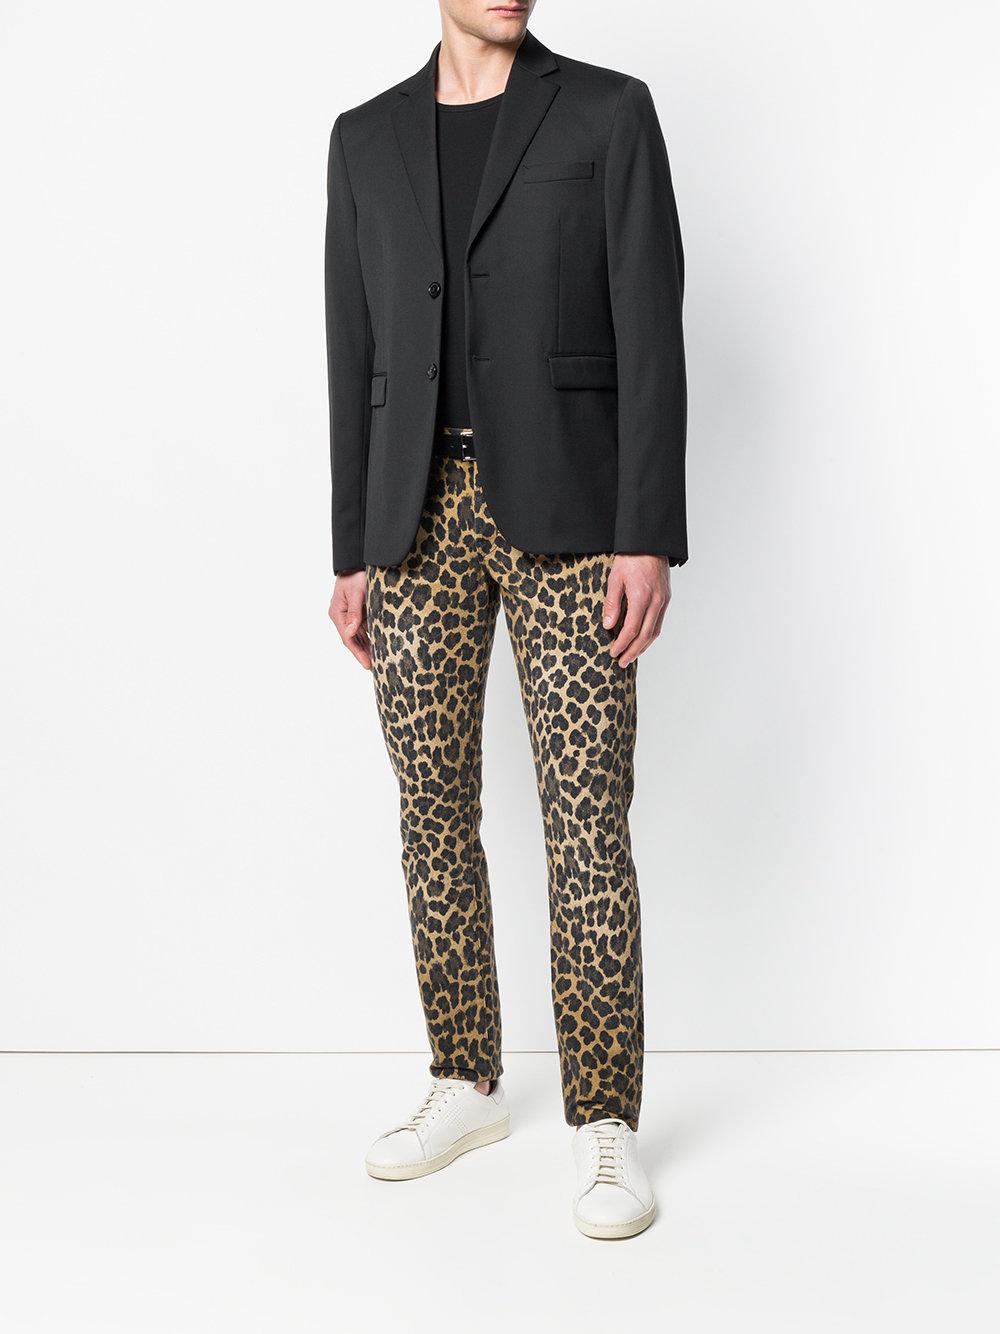 Tom Ford Leopard Print Skinny Jeans in Brown for Men | Lyst